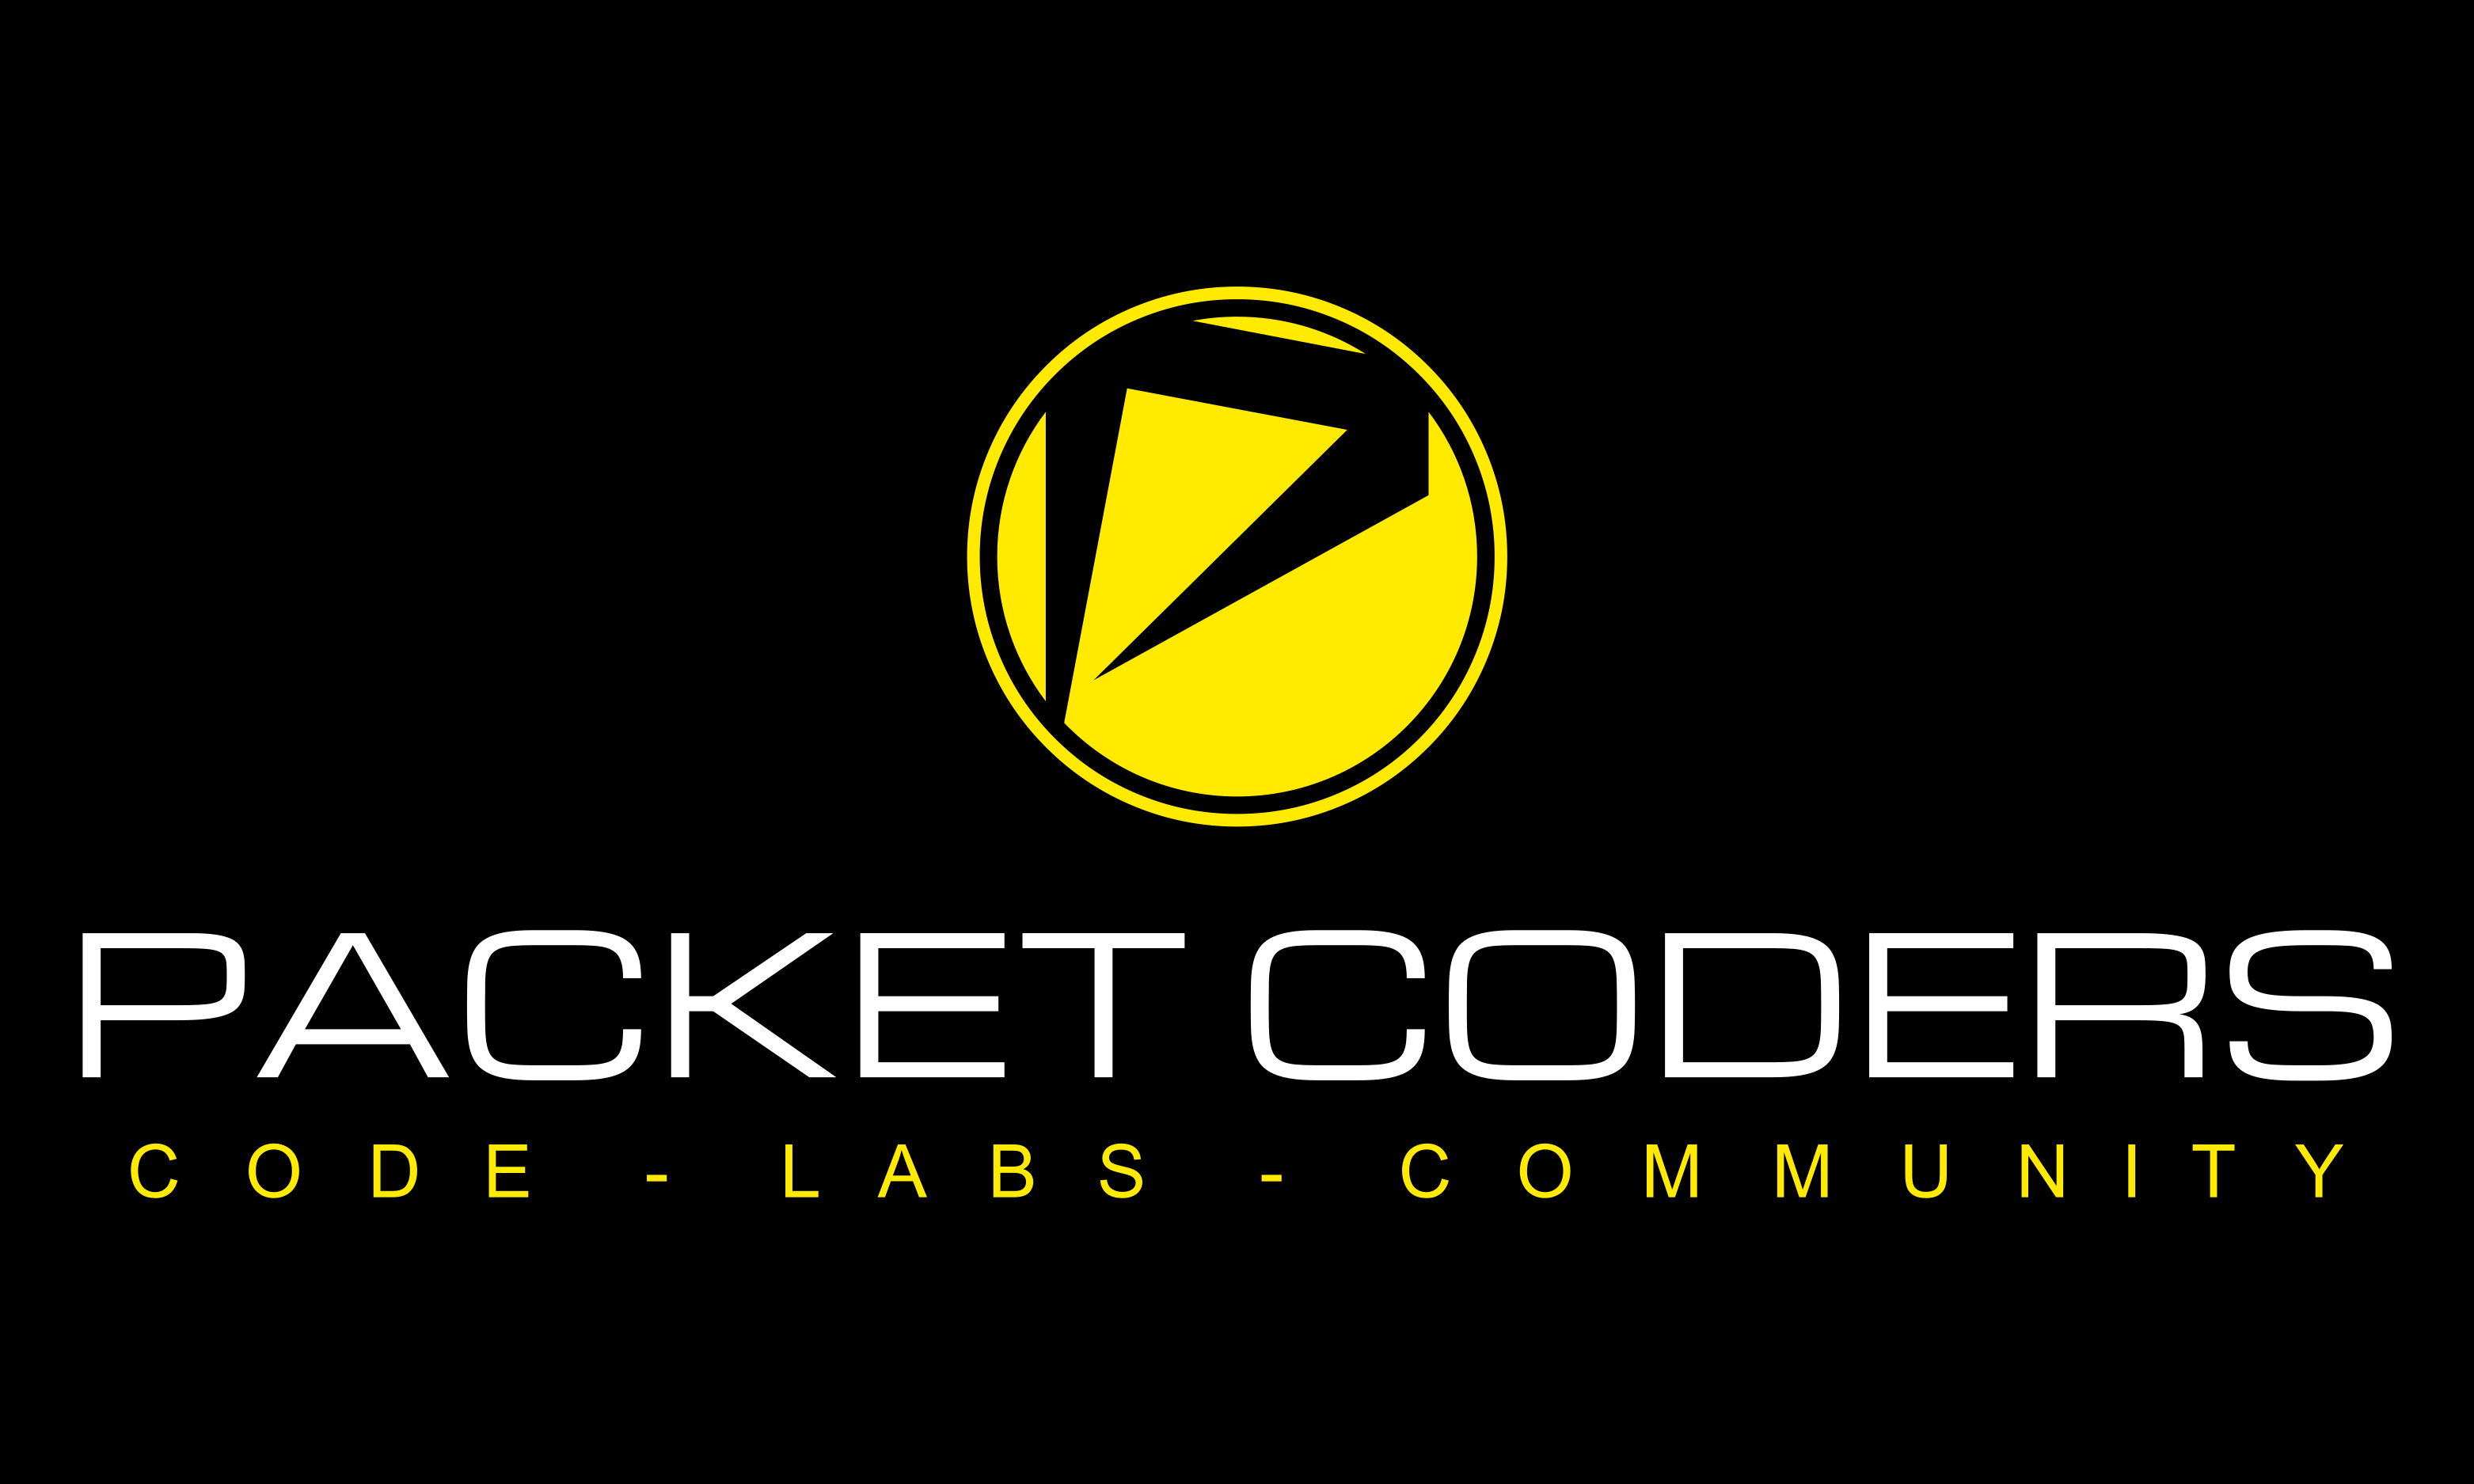 Announcing - Packet Coders!